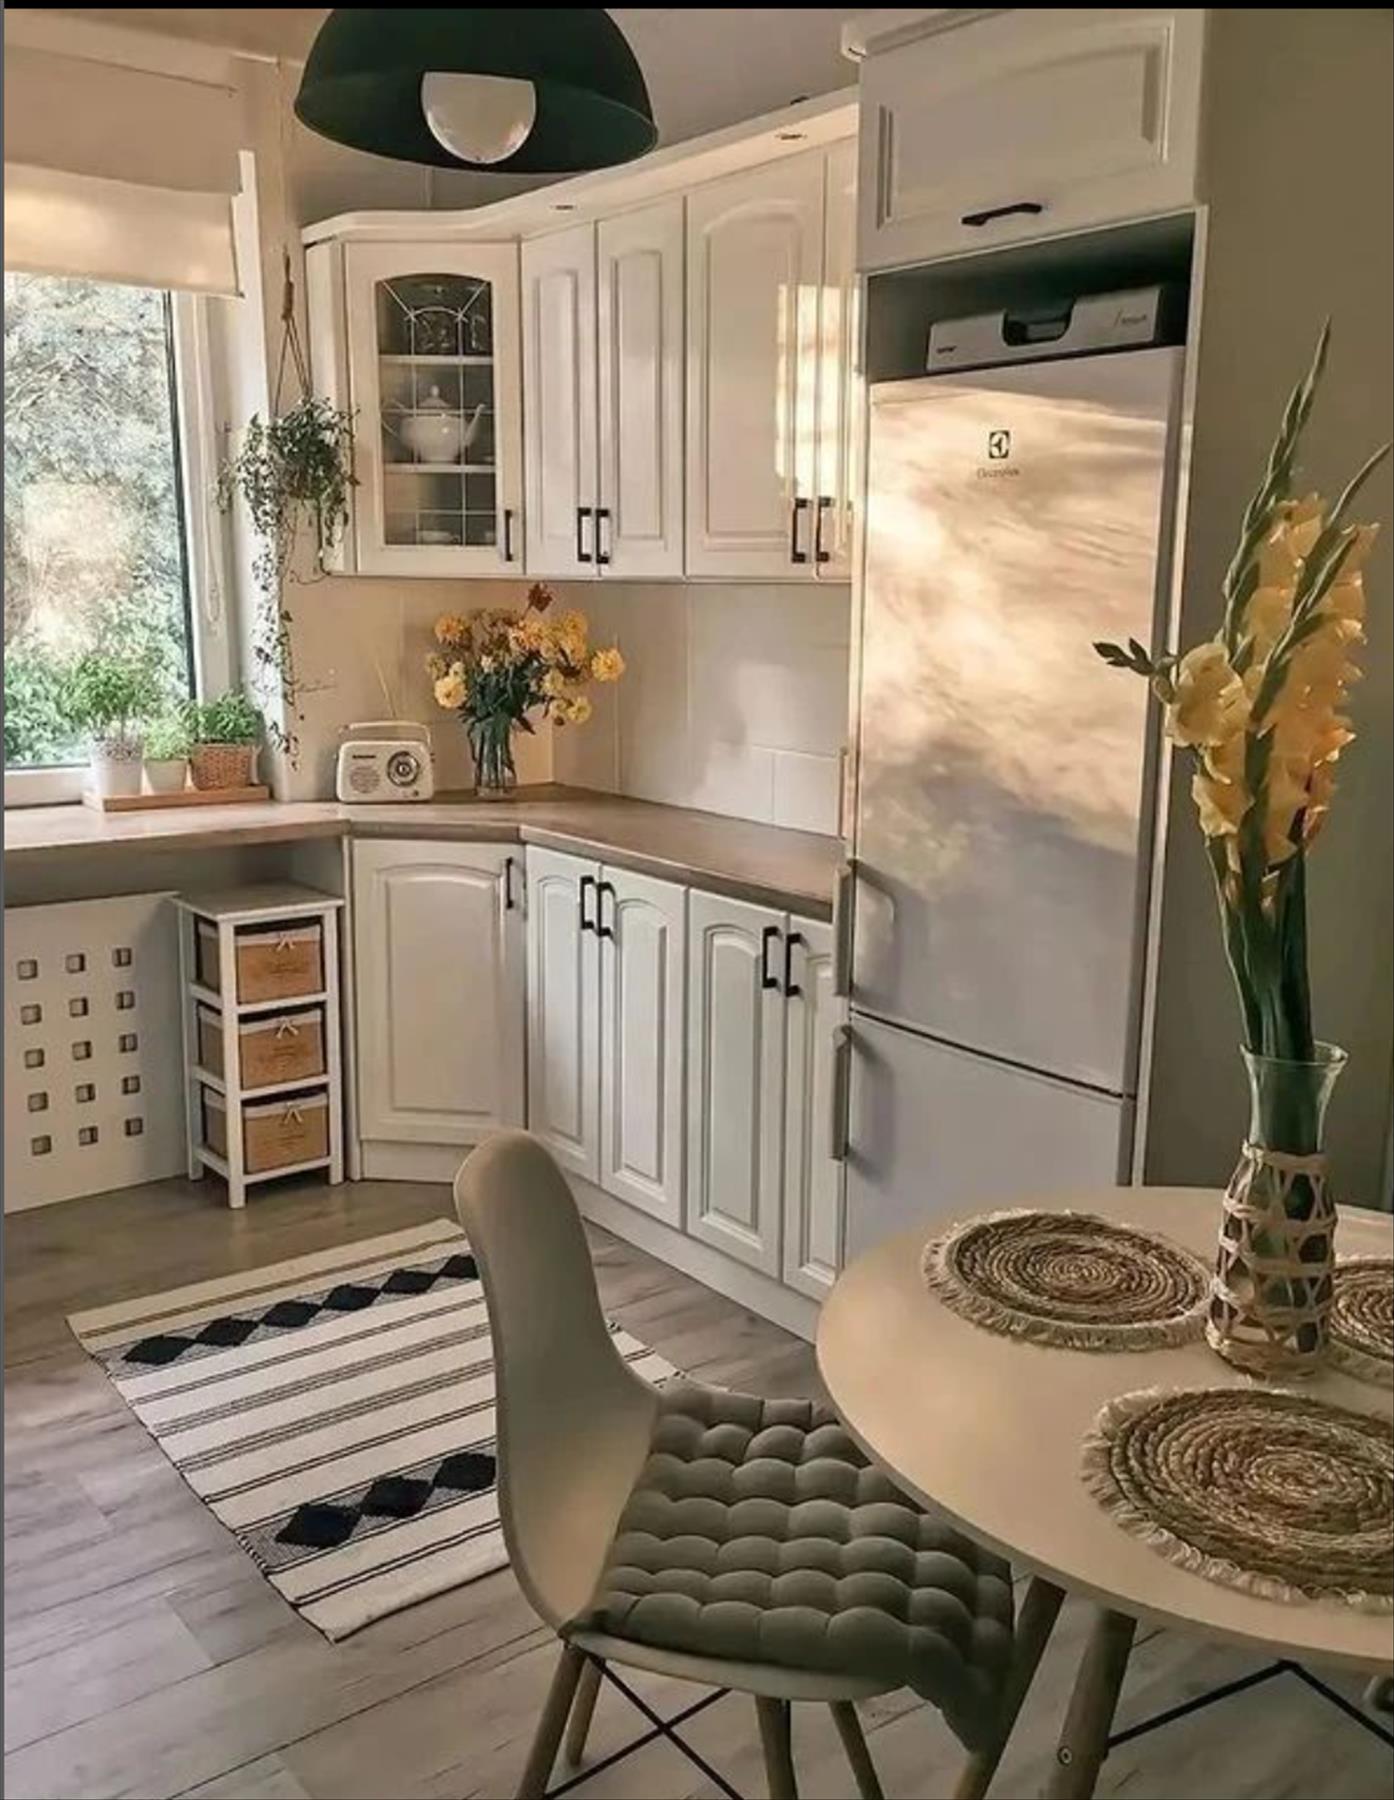 Inspiring spring kitchen decor ideas  easily for your home